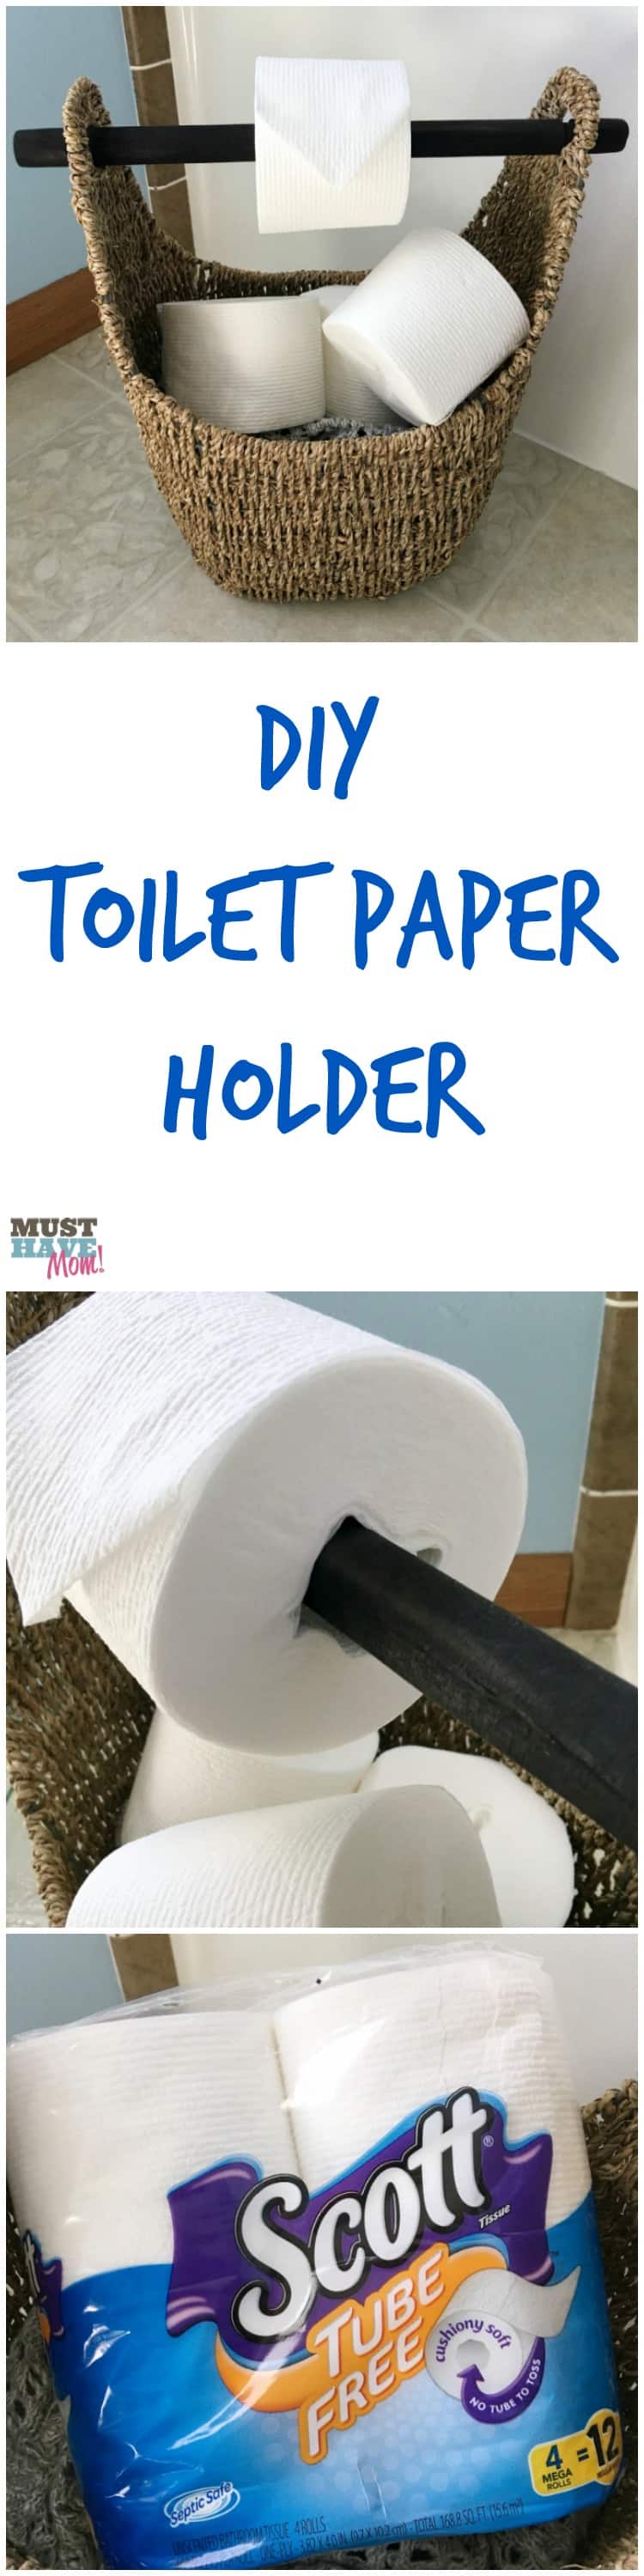 DIY toilet paper holder idea! Use a wicker basket with a wood handle as a toilet paper holder and fill the basket with extra toilet paper rolls. Works with tube free toilet paper rolls too!